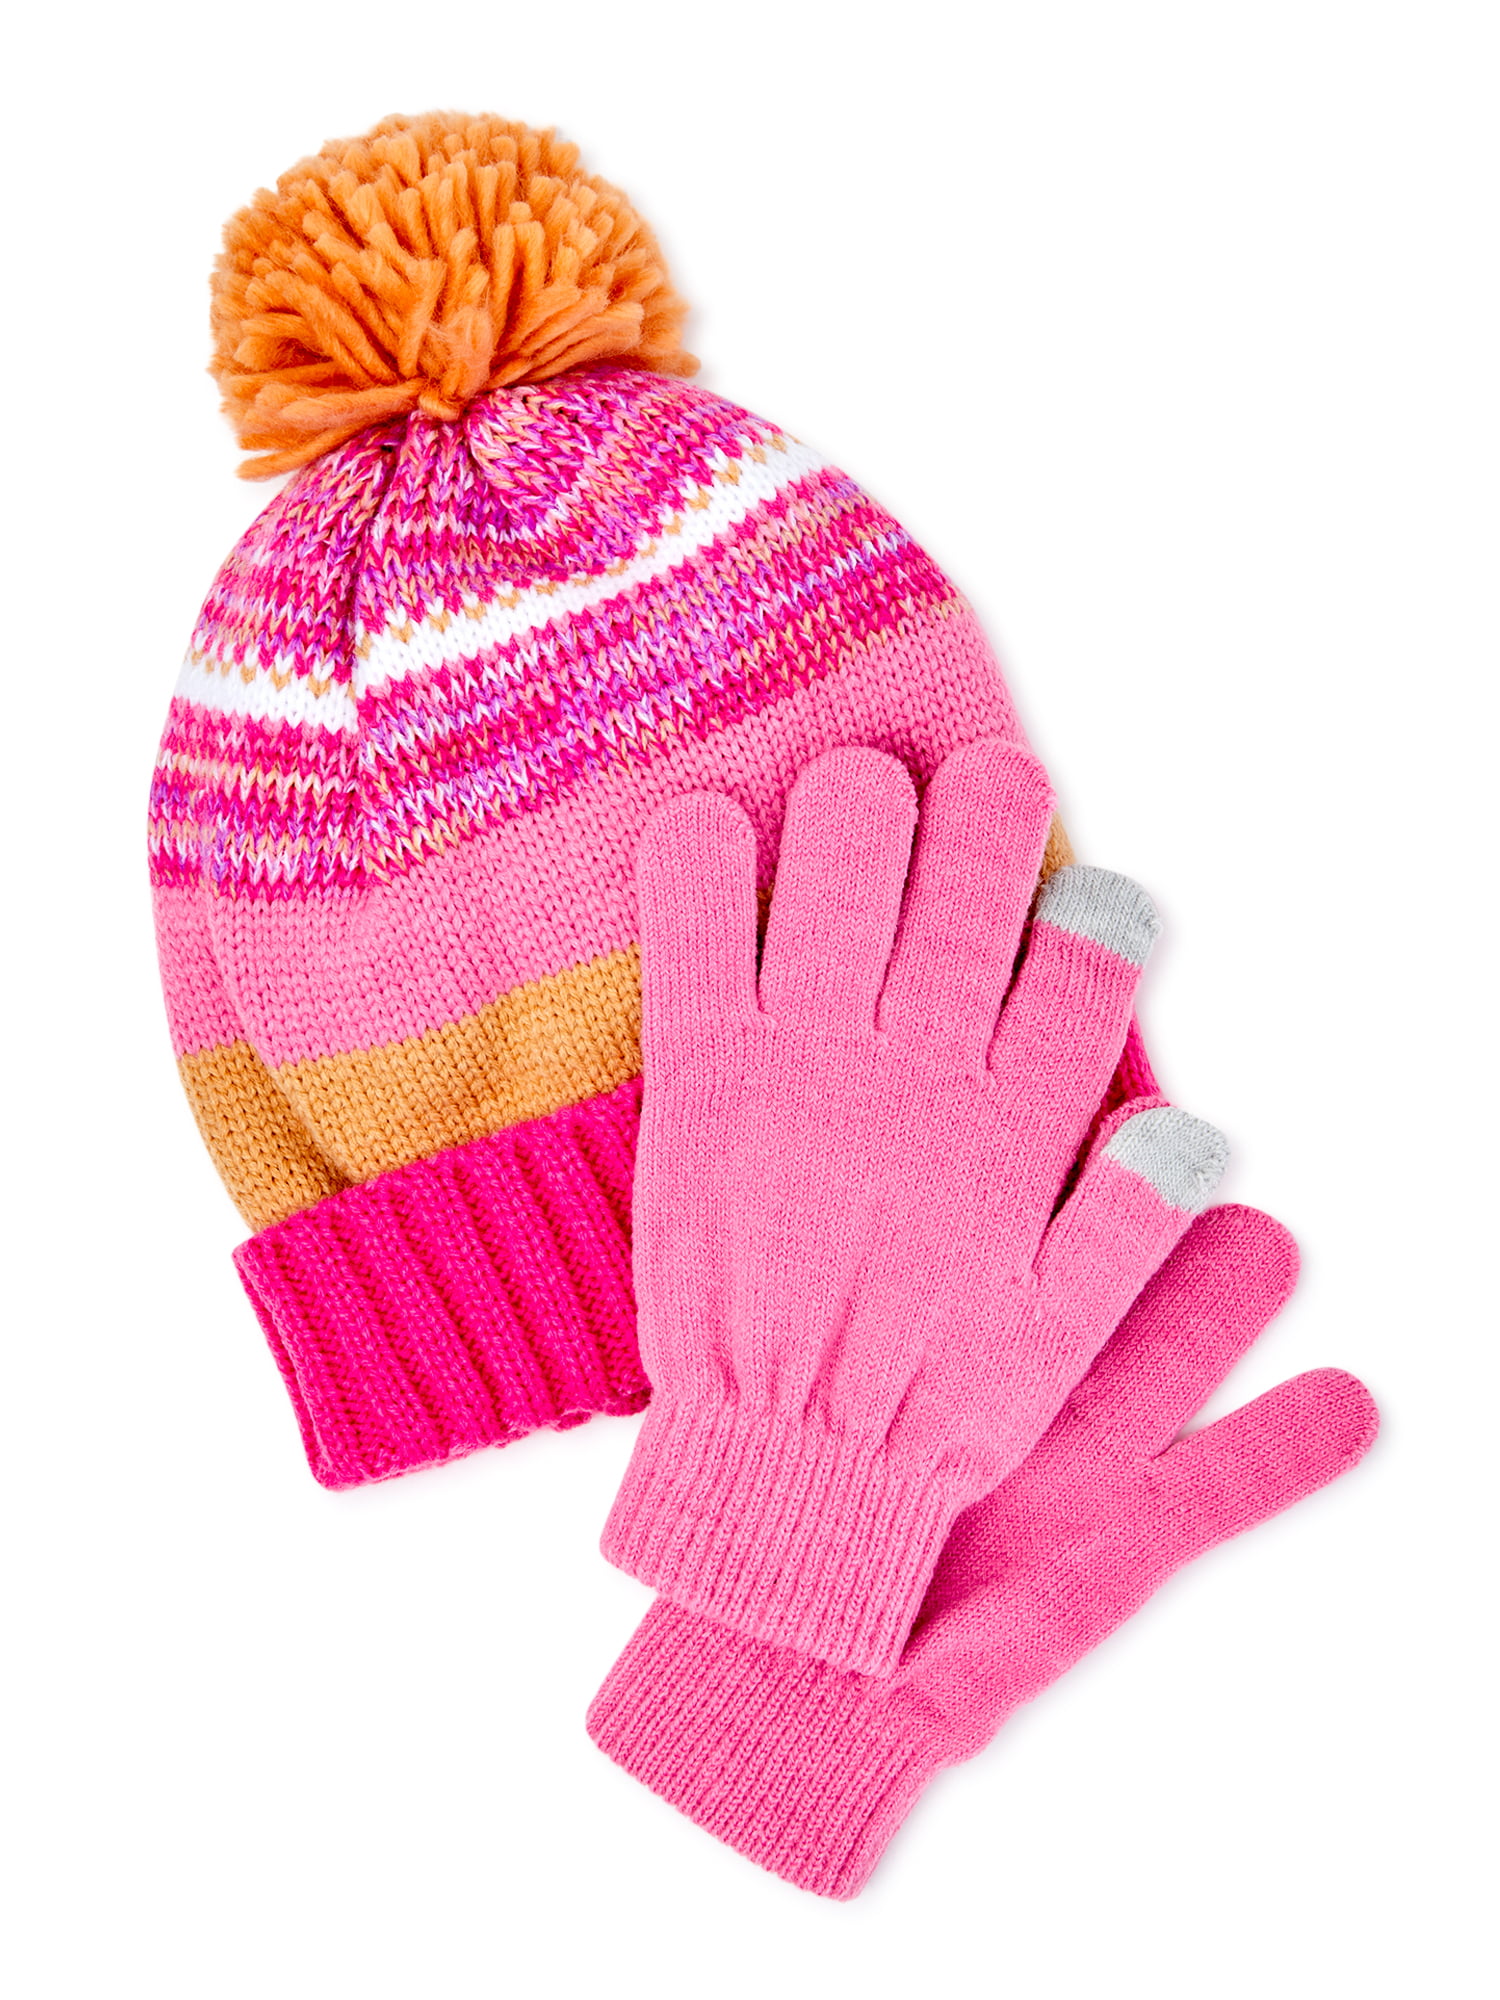 Girls Personality 3 Piece Knit Cuffed Pom Beanie Scarf & Gloves Set 4 Colors